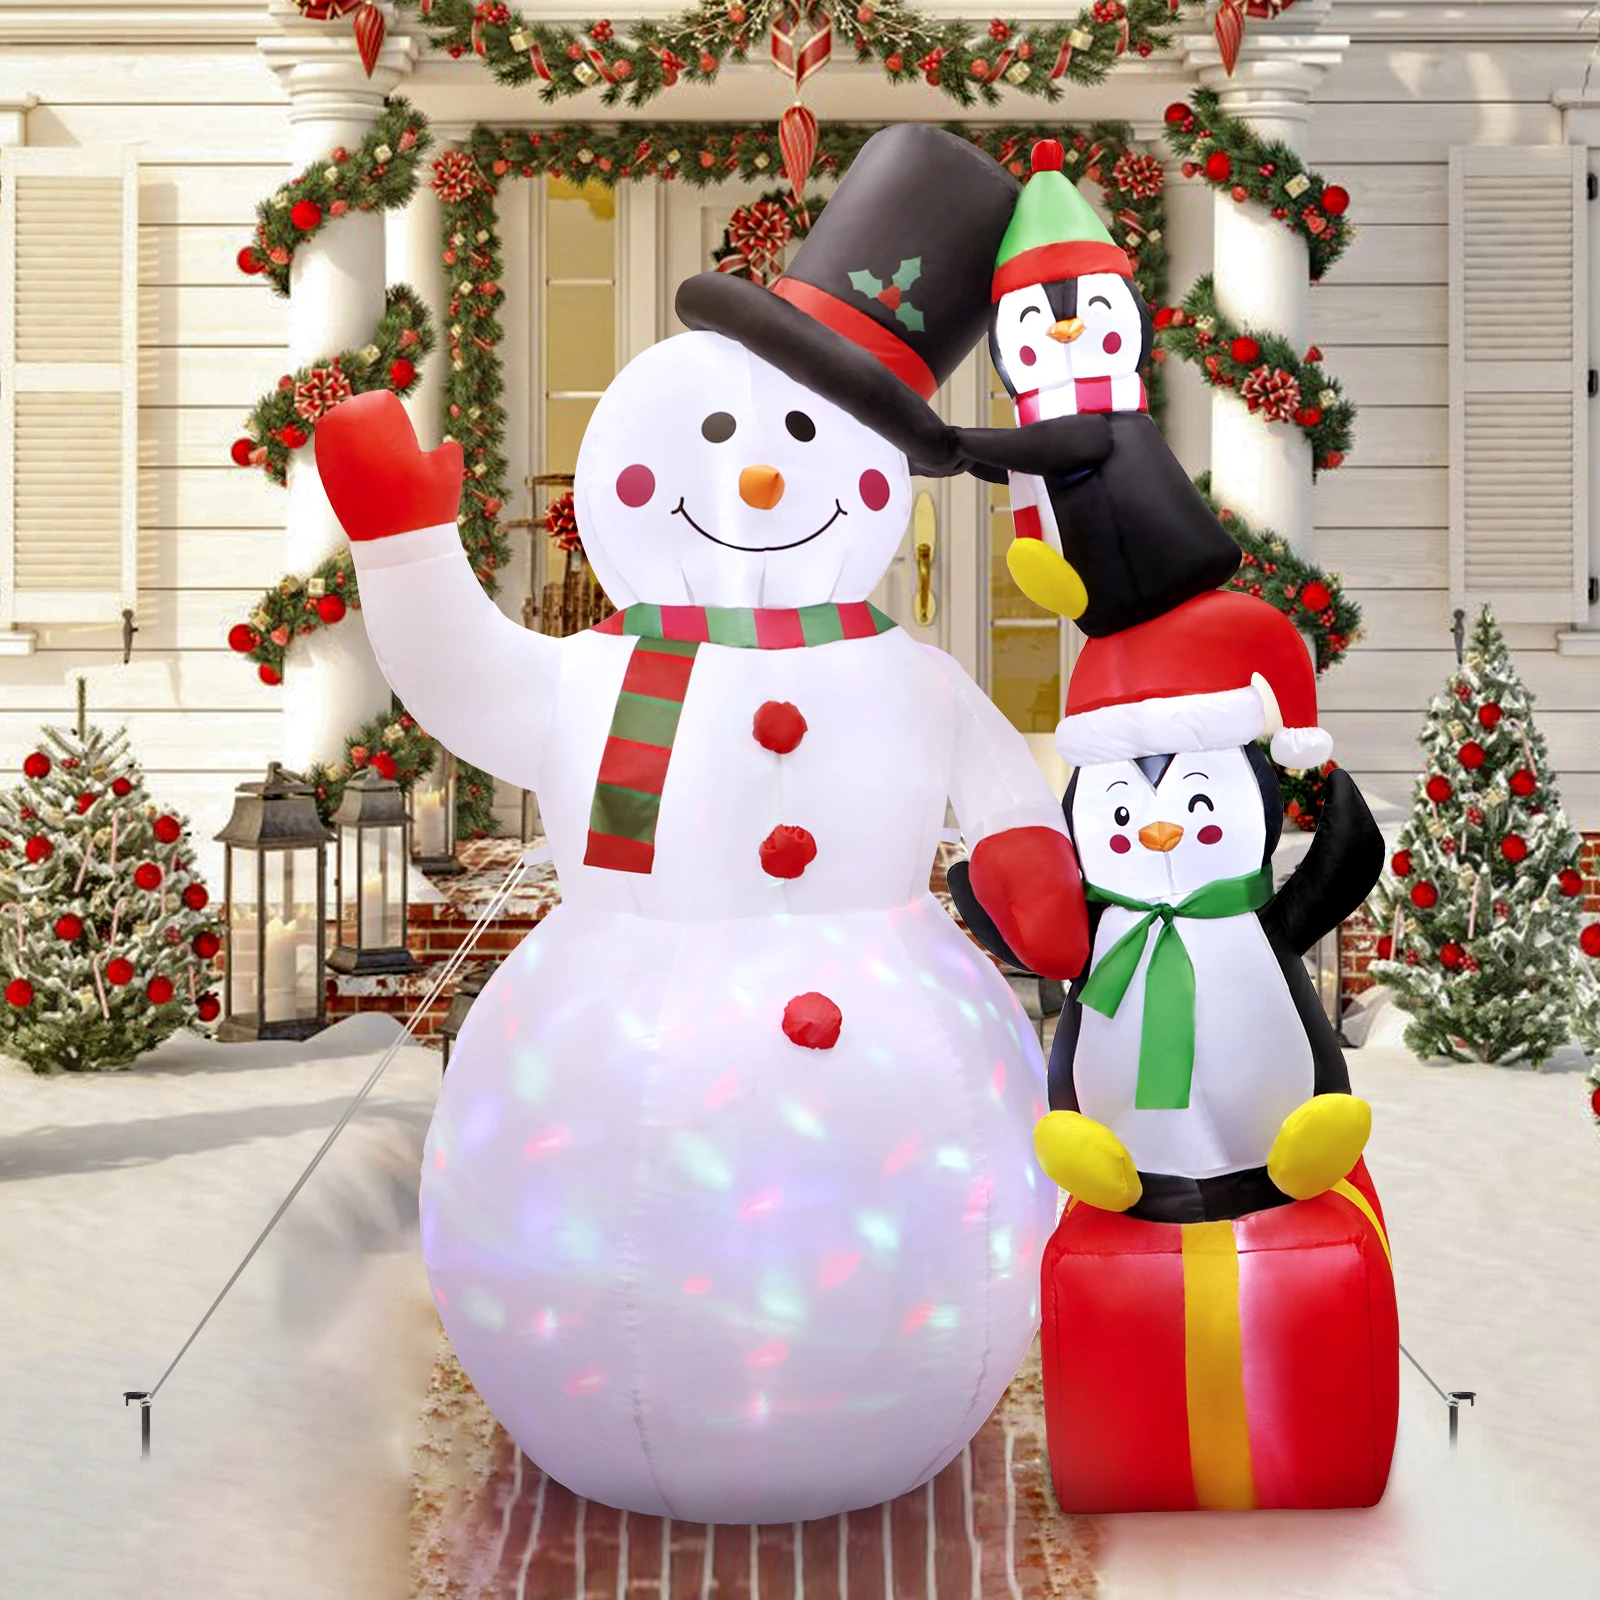 https://ae01.alicdn.com/kf/S60f675cb35d4441ebccbcf4e3fa7eb93w/Christmas-Inflatables-6Ft-Snowman-and-Penguin-with-Build-in-LED-Lights-Large-Blow-up-Yard-Decorations.jpg